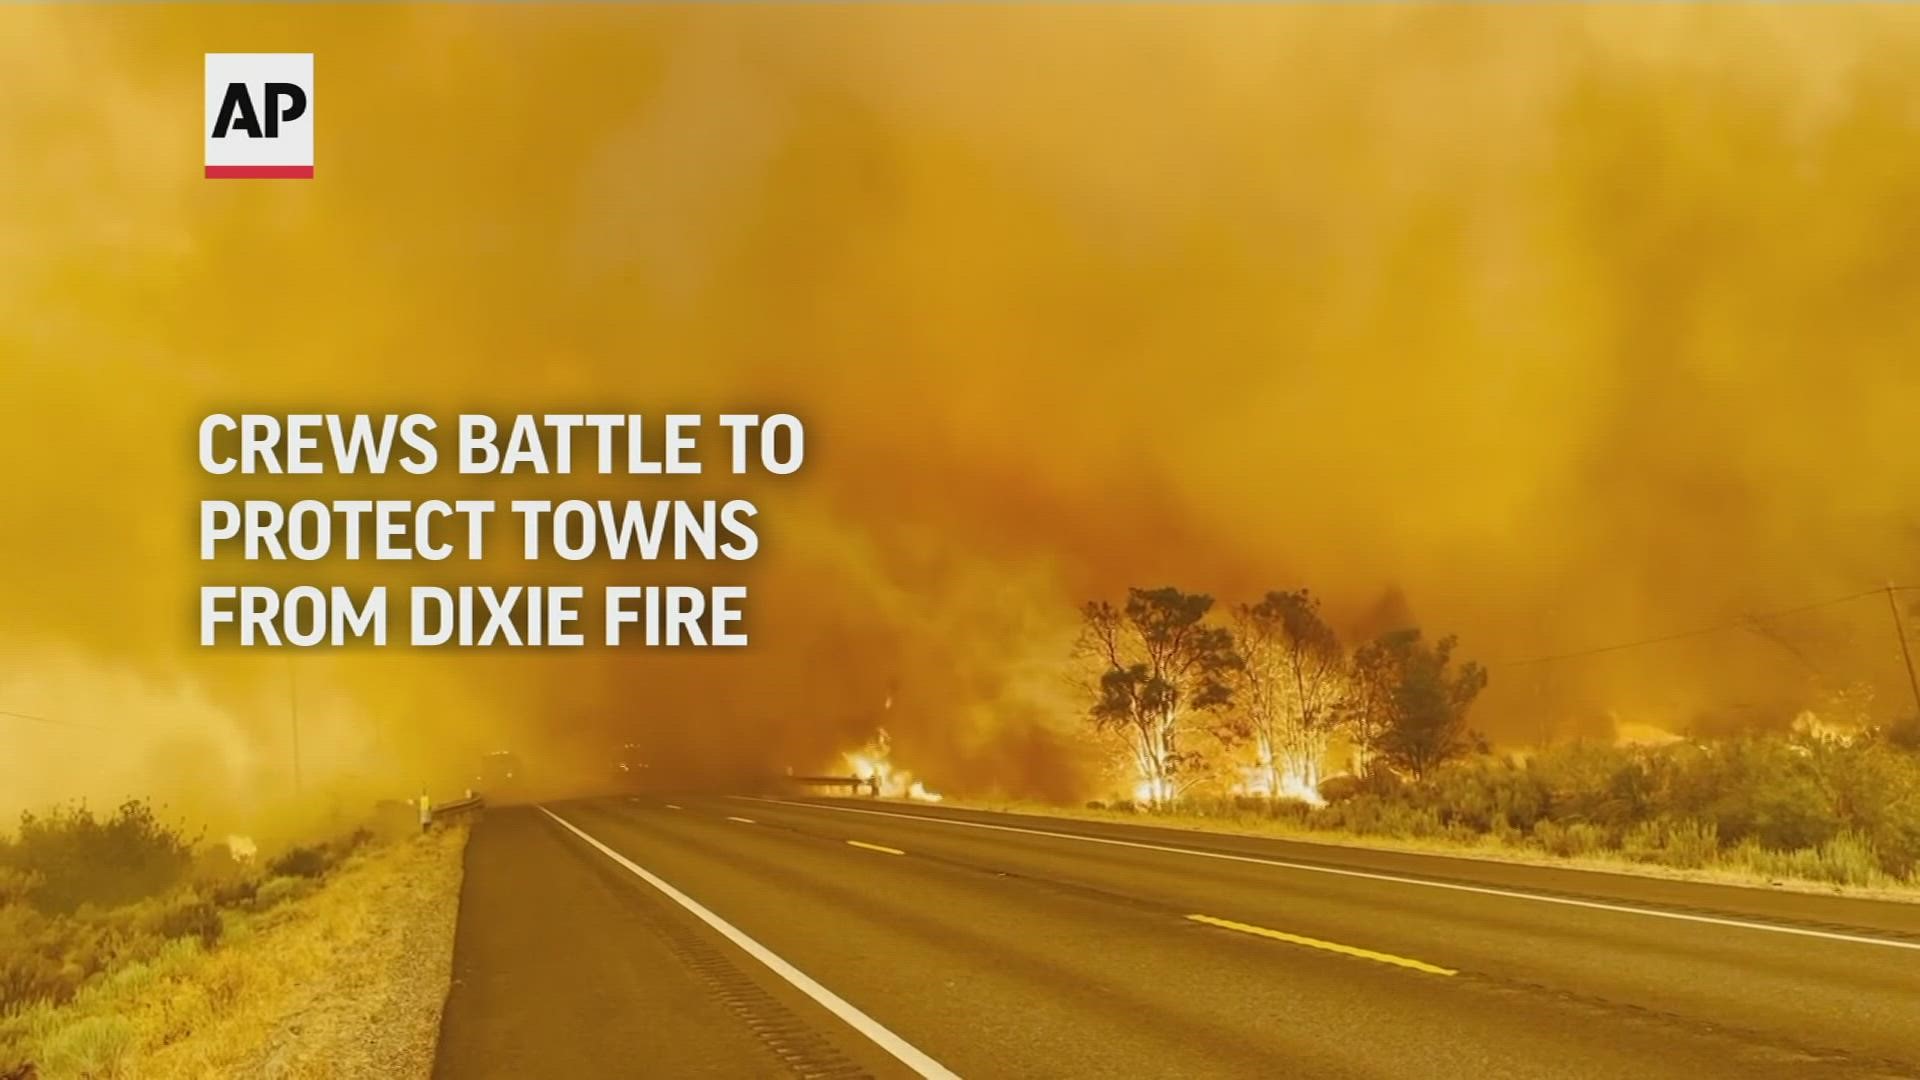 Northern California's Dixie Fire is the largest of nearly 100 major wildfires burning across a dozen Western states.